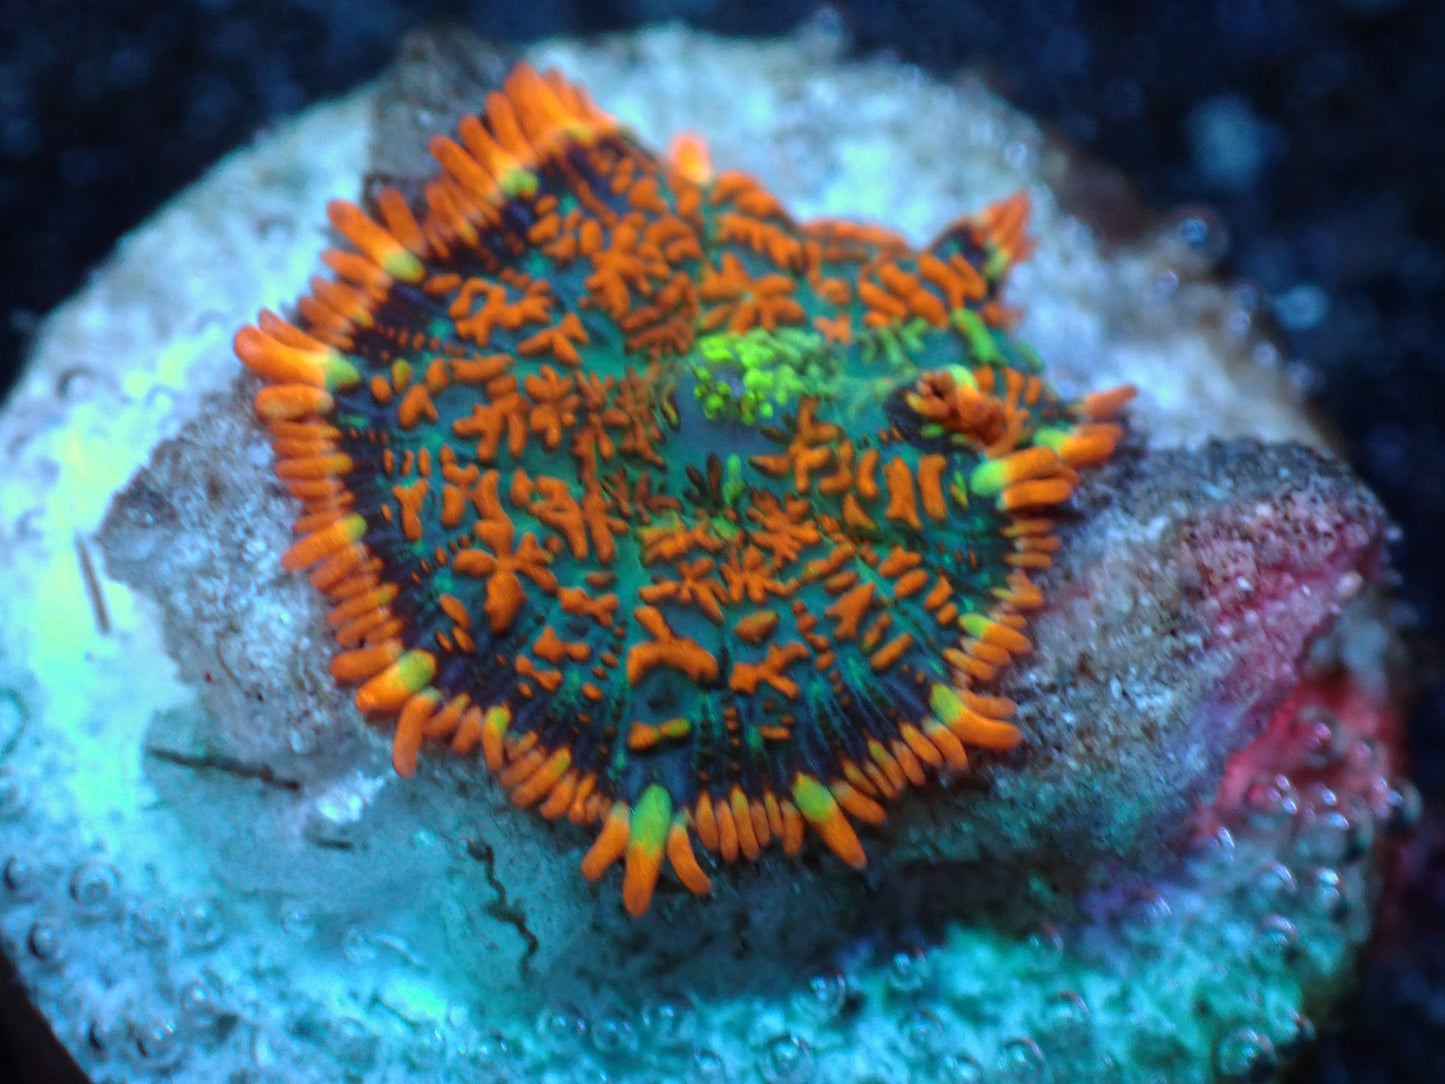 Cool Baby Rhodactis Auctions 4/17 ended